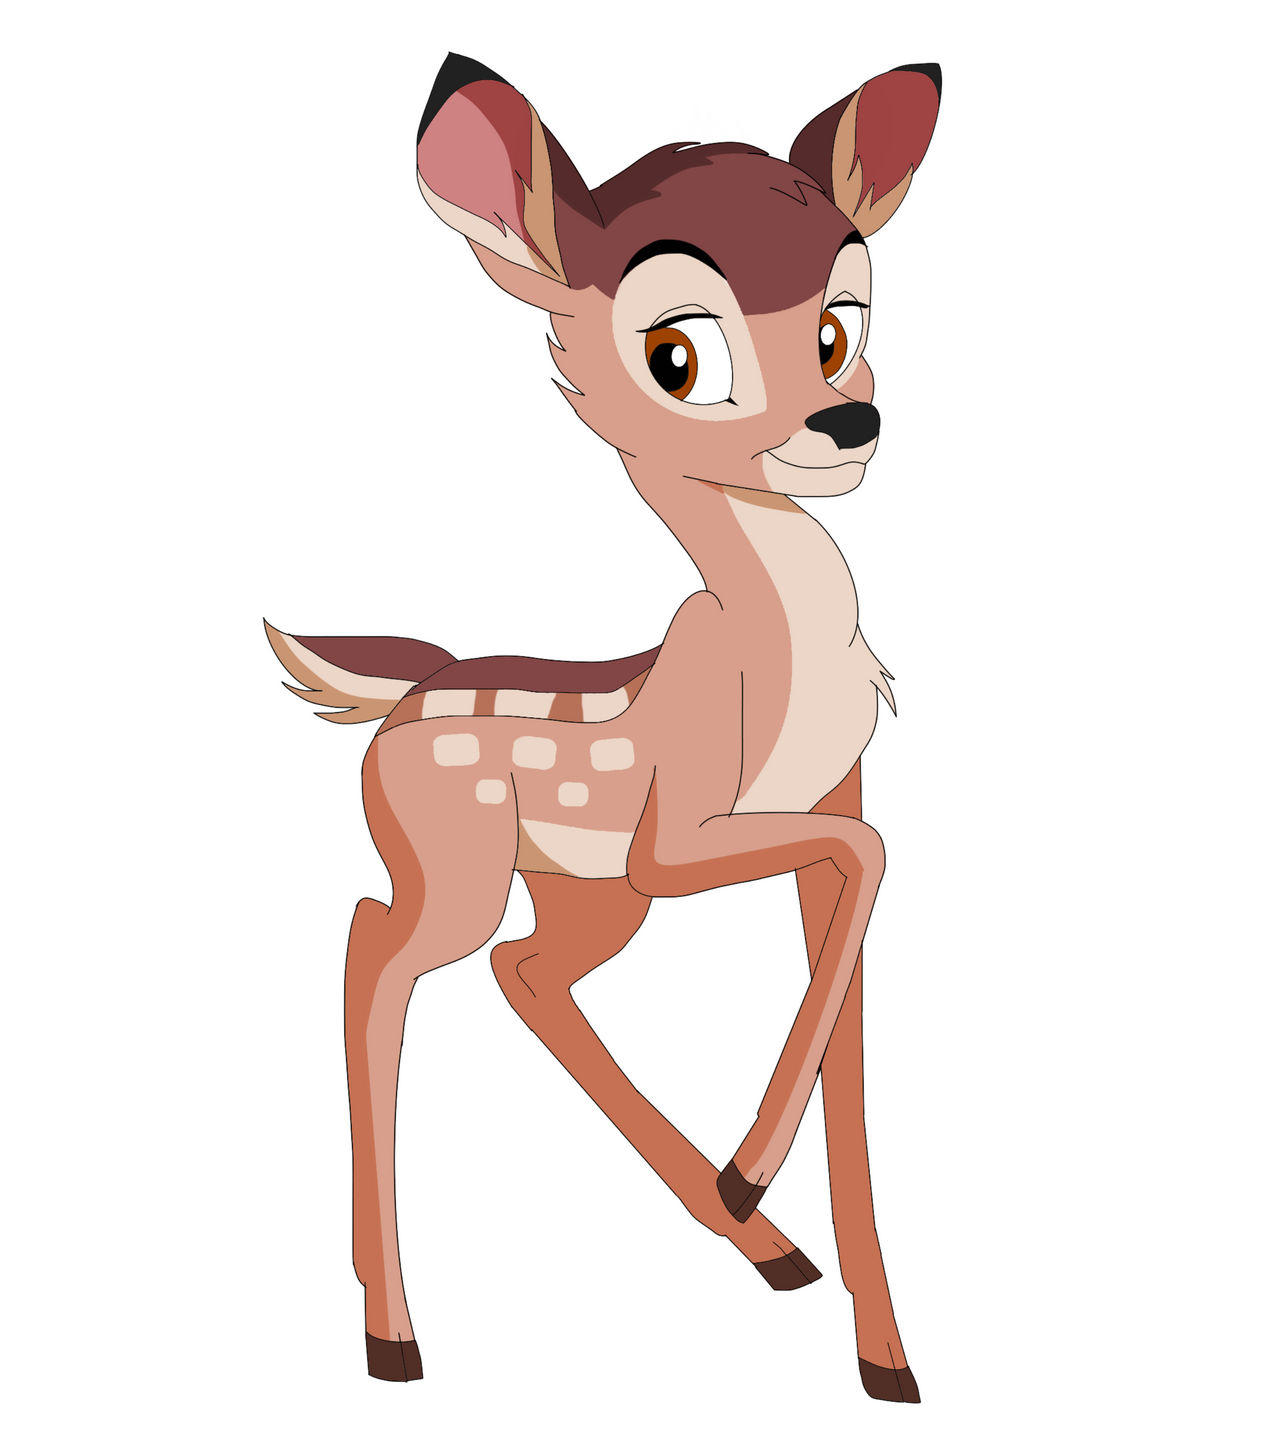 Drawing of Geno (Bambi's Son) by PrincessEdith568 on DeviantArt